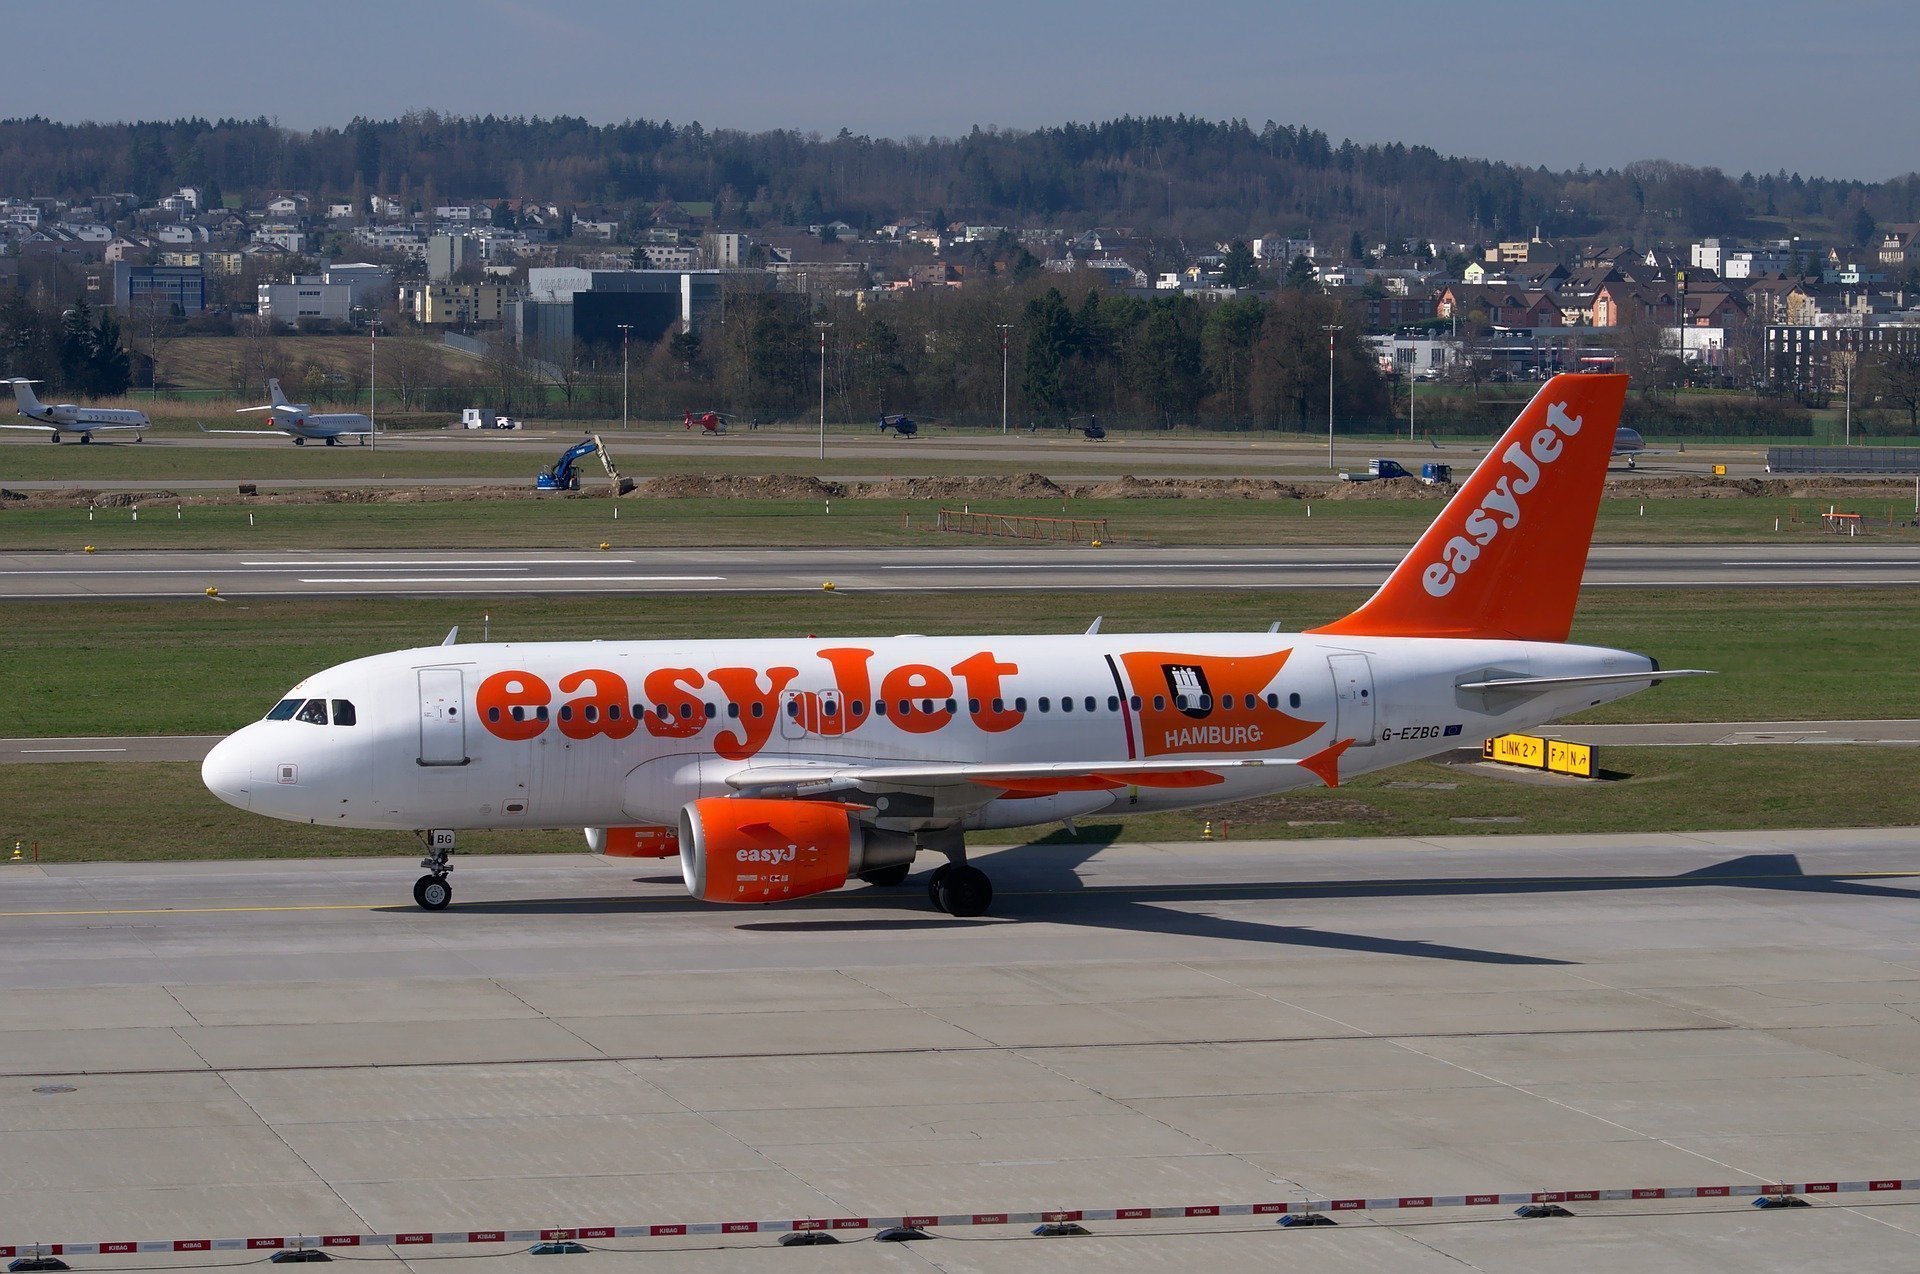 easyjet buy luggage online after booking